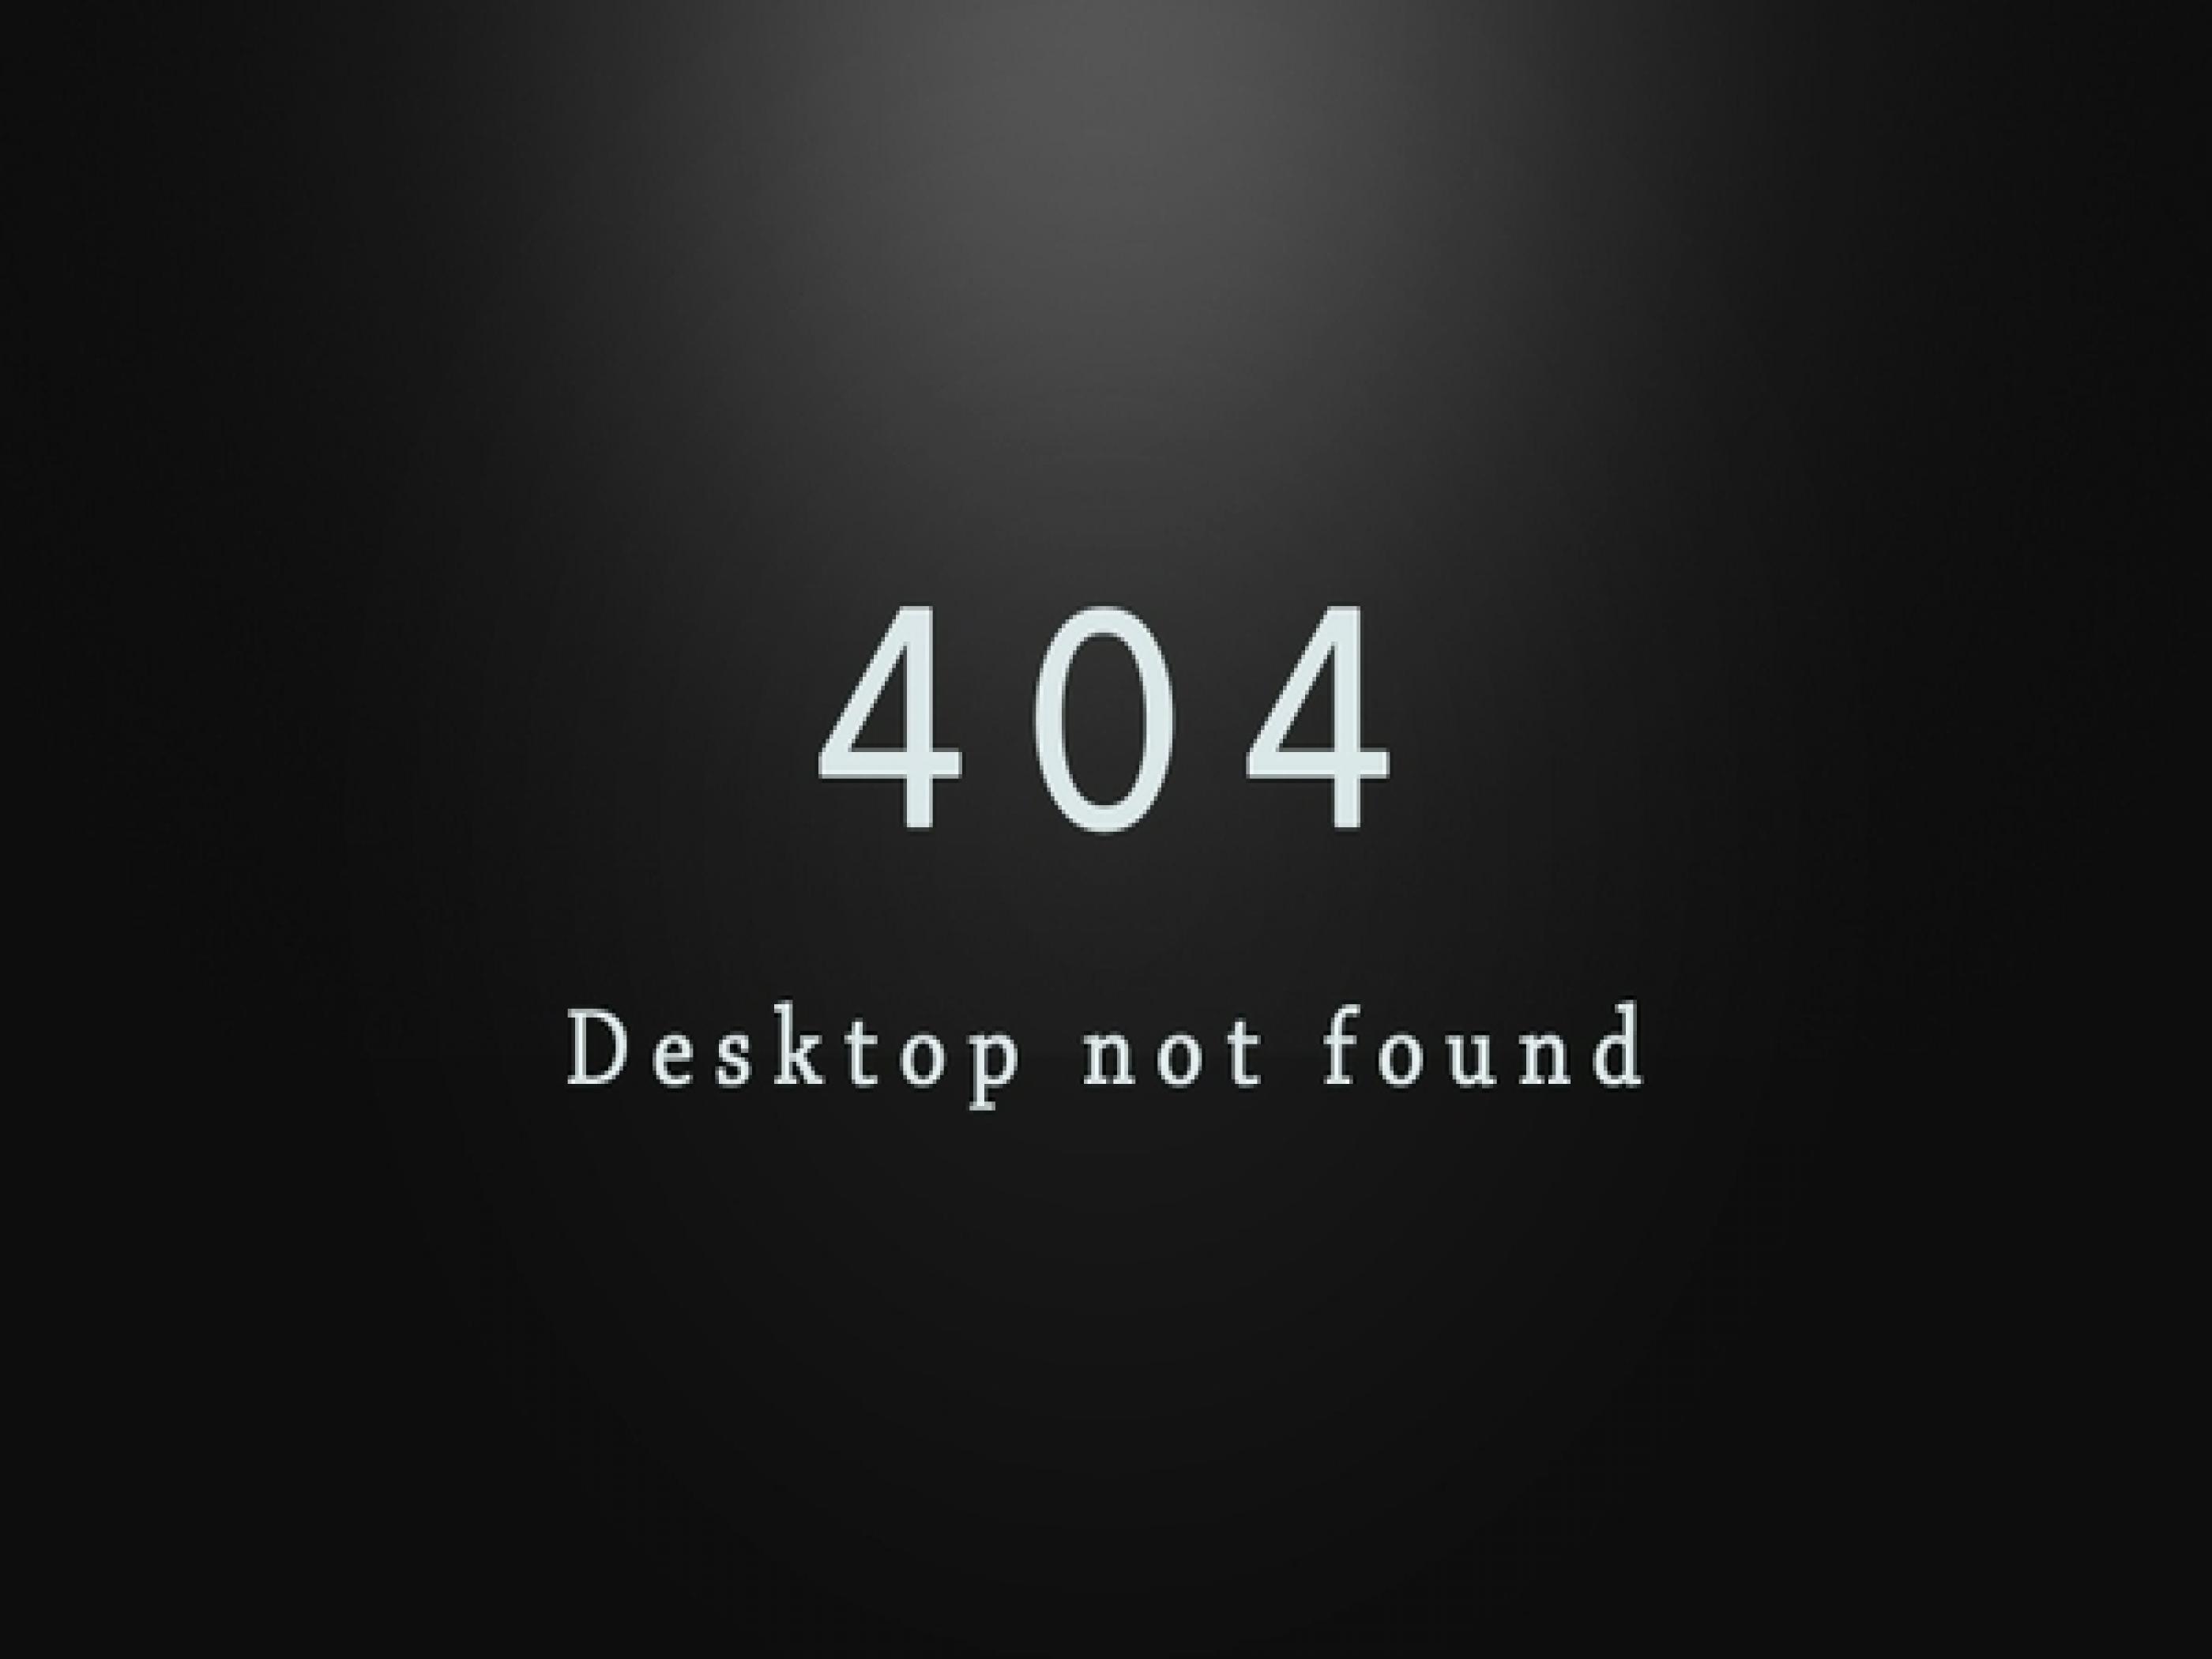 Download wallpapers 404 Wallpaper not found green sign, 4k, green  brickwall, 404 Wallpaper not found, green blank display, 404 Wallpaper not  found neon symbol for desktop with resolution 3840x2400. High Quality HD  pictures wallpapers